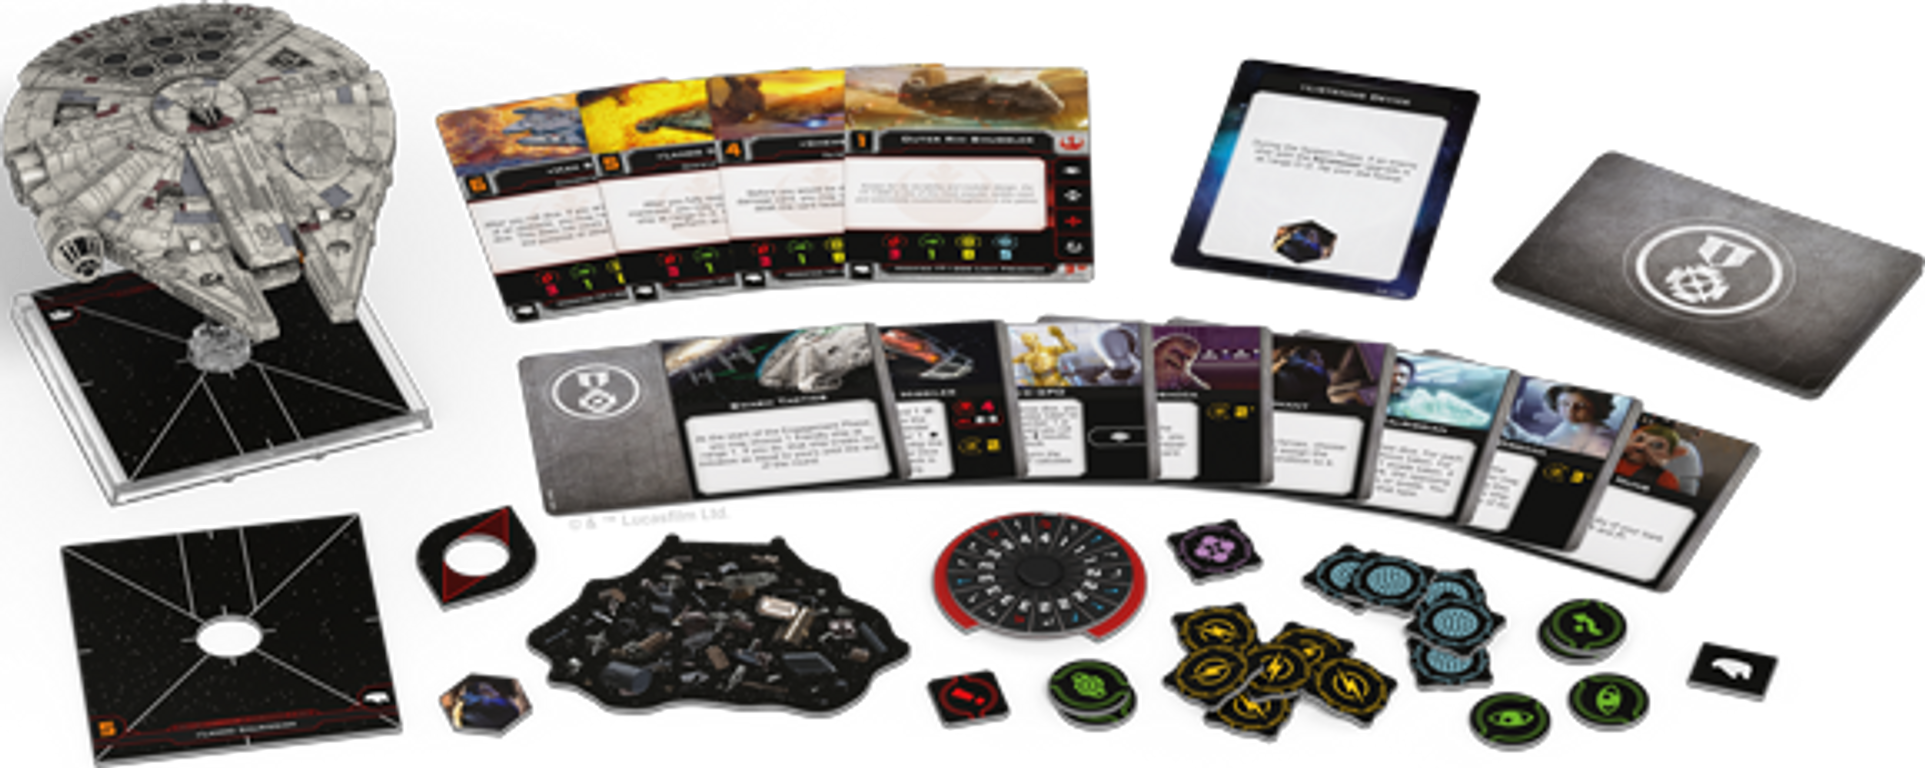 Star Wars: X-Wing (Second Edition) – Millennium Falcon Expansion Pack componenten